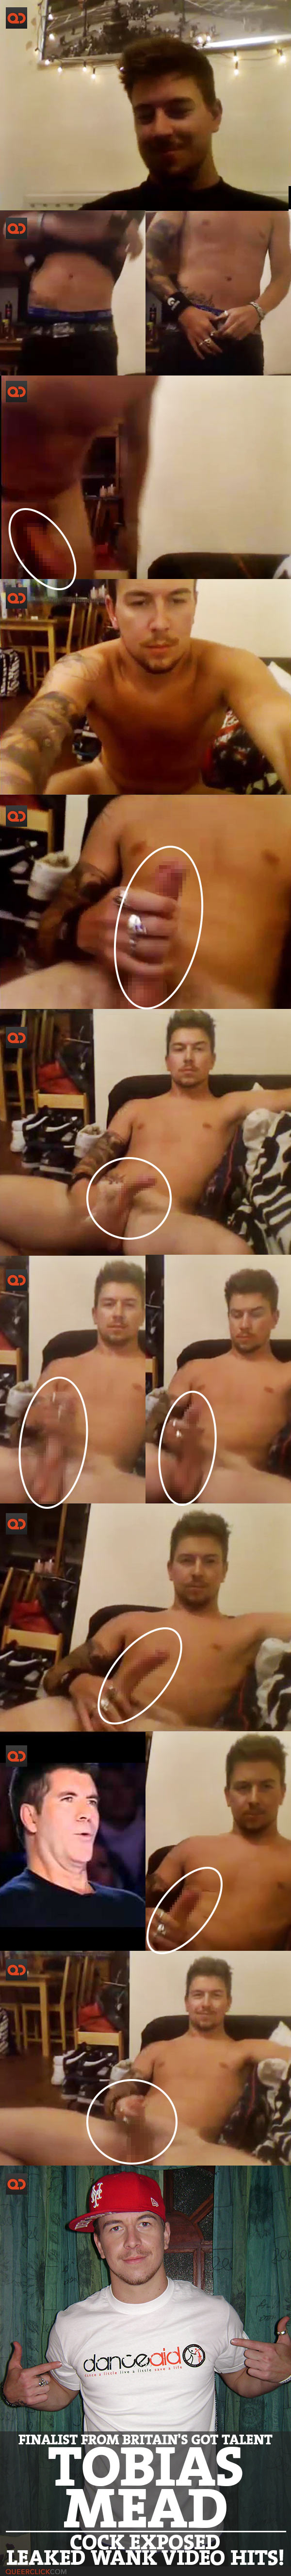 Tobias Mead, Finalist From Britain's Got Talent, Cock Exposed - Leaked Wank Video Hits!